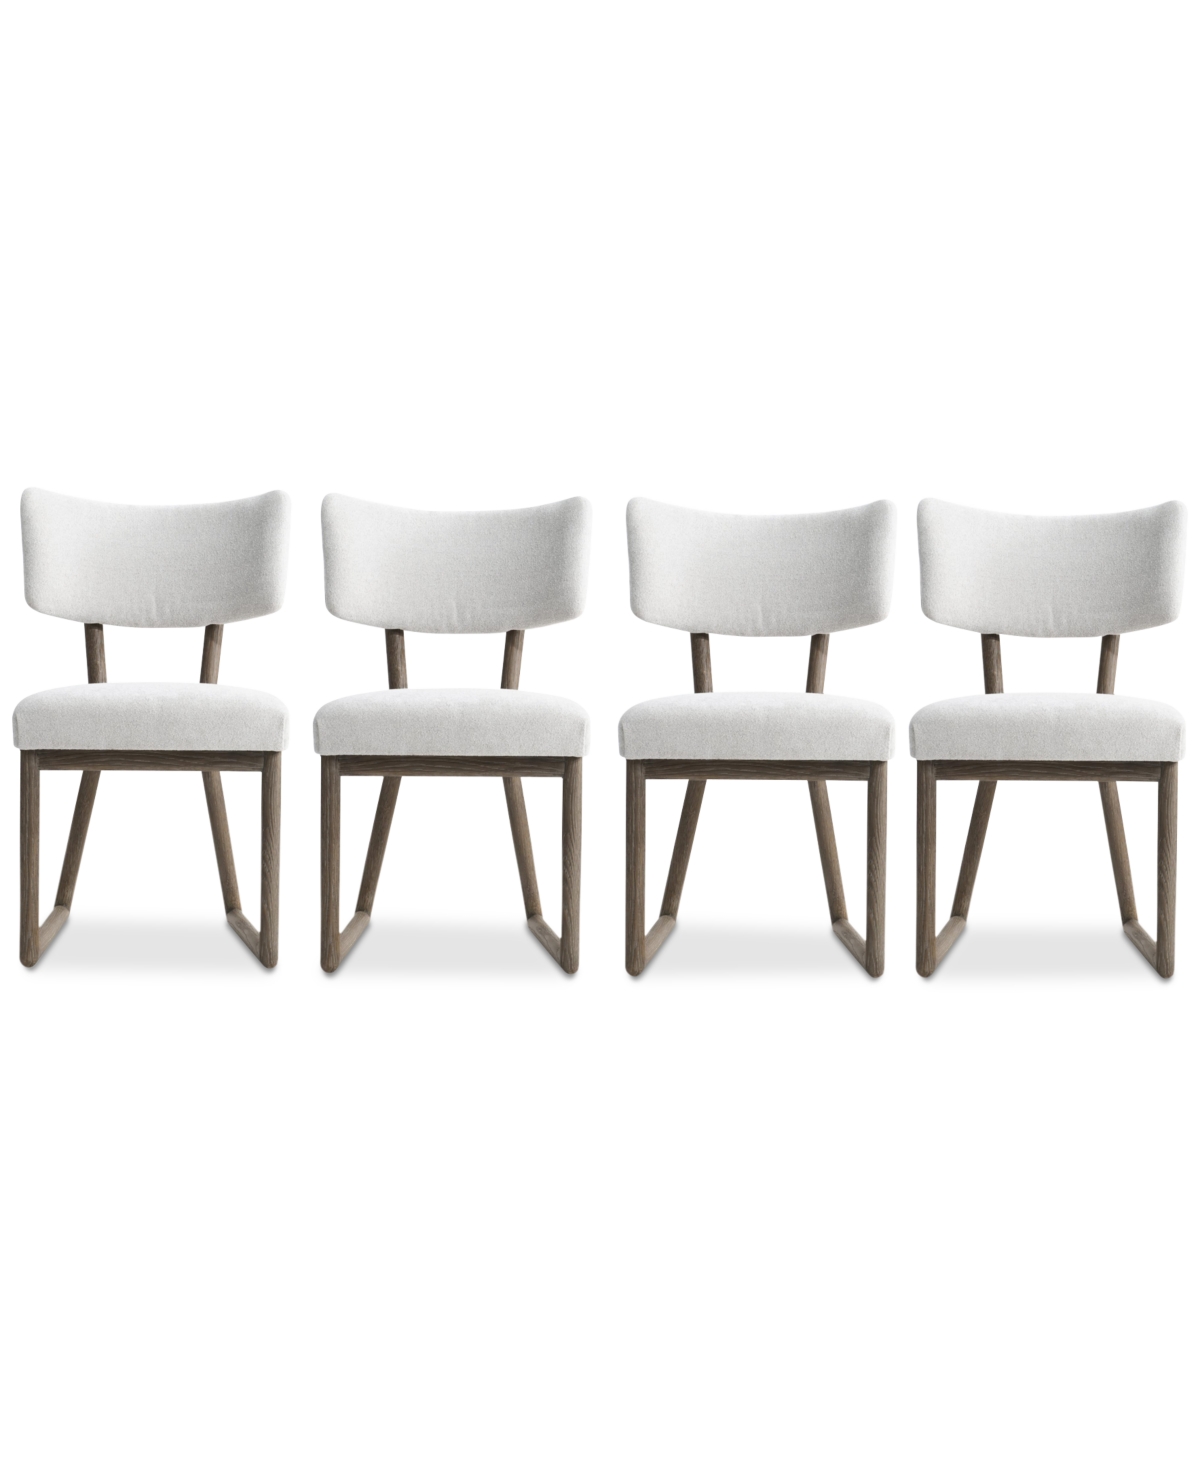 Bernhardt Foundations 4pc Side Chair Set In No Color